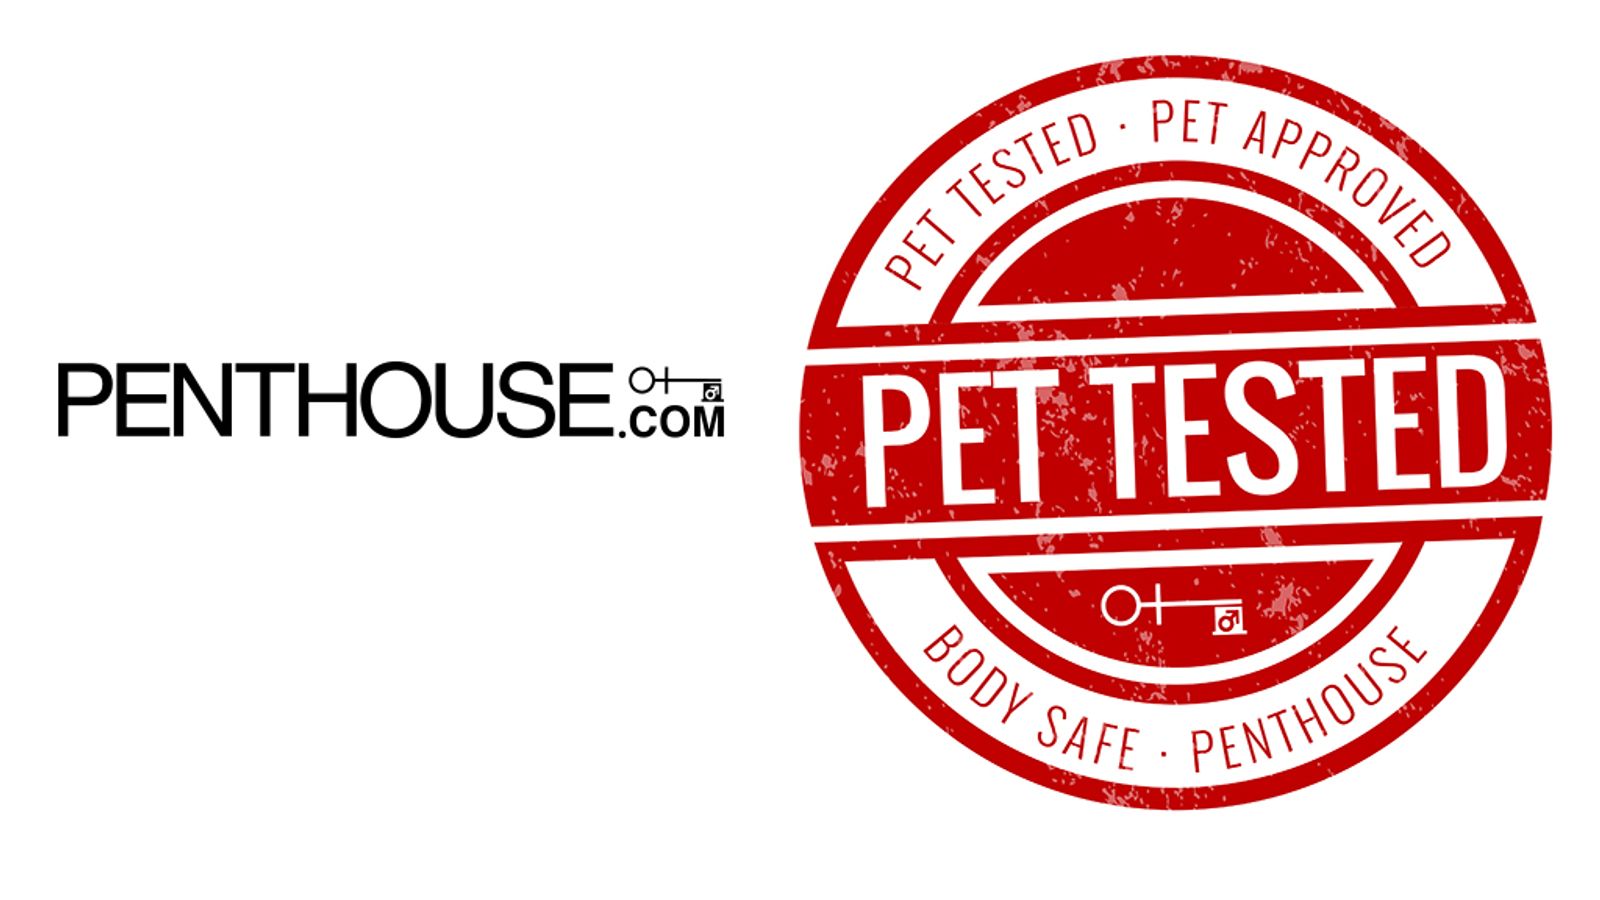  Penthouse Launches PenthouseStore.com With 'Pet Tested' Products